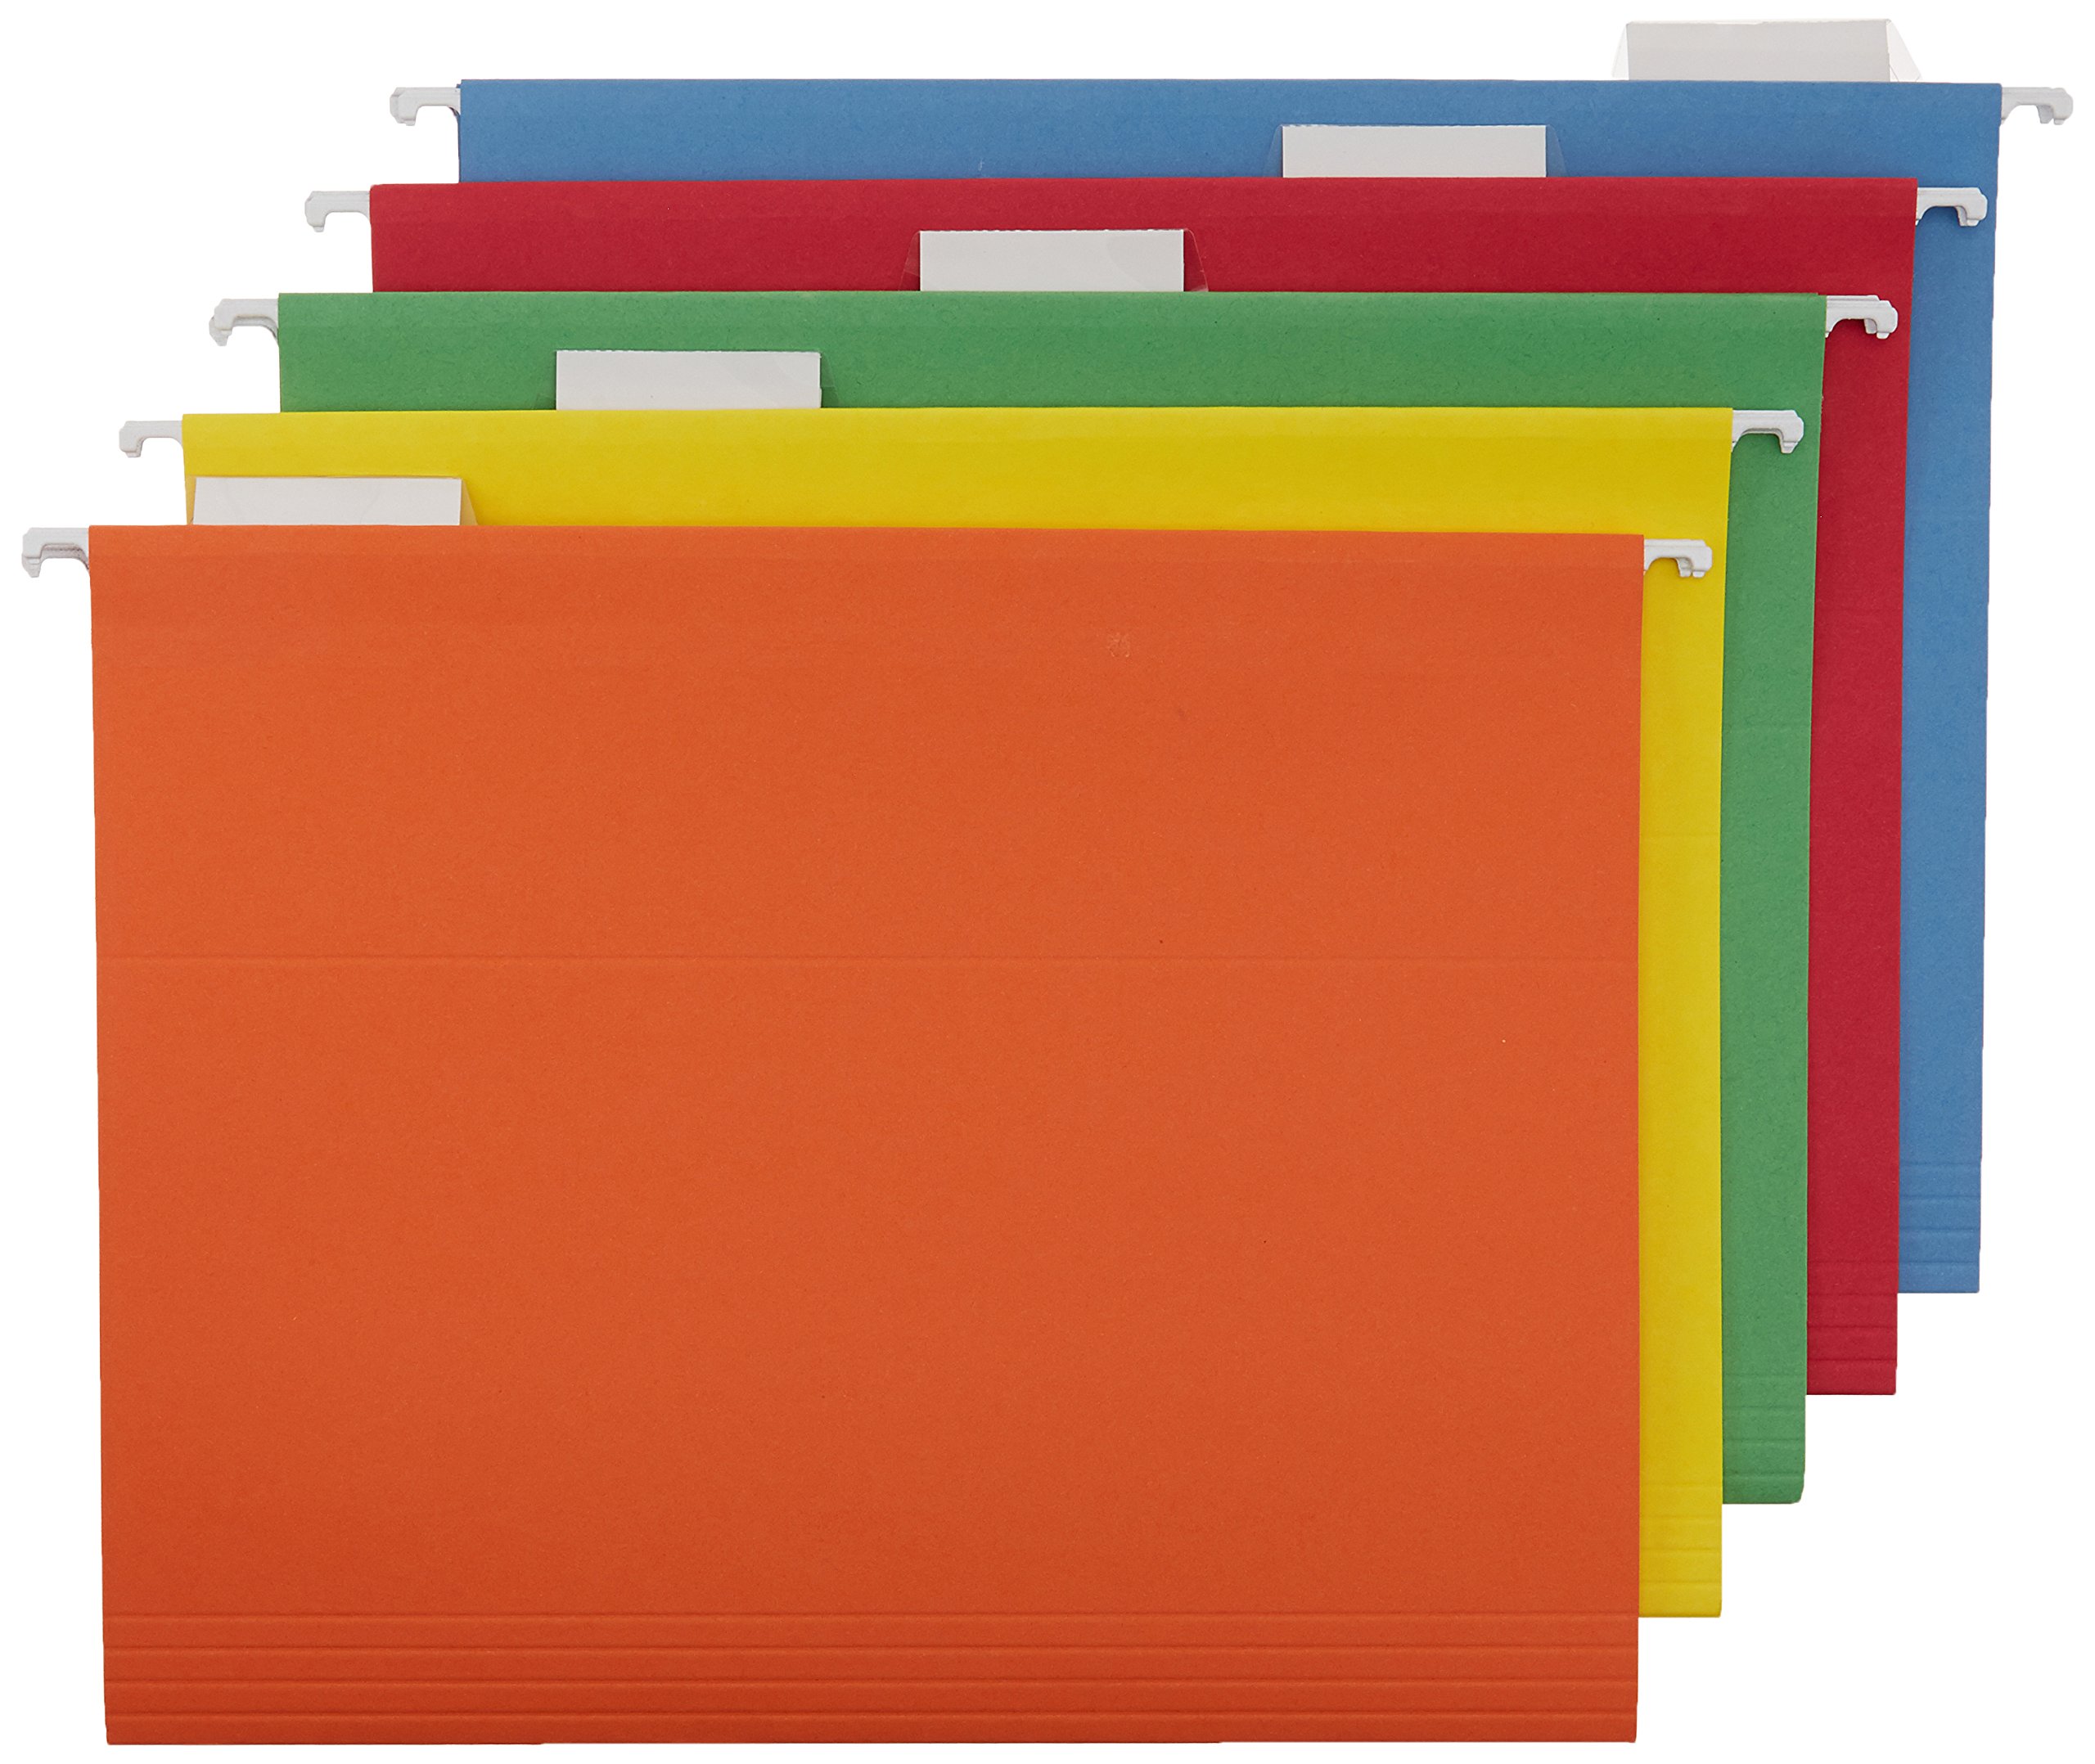 Amazon Basics 8-Sheet Strip-Cut Paper, CD and Credit Card Home Office Shredder & Hanging Organizer File Folders - Letter Size, Assorted Colors, 25-Pack